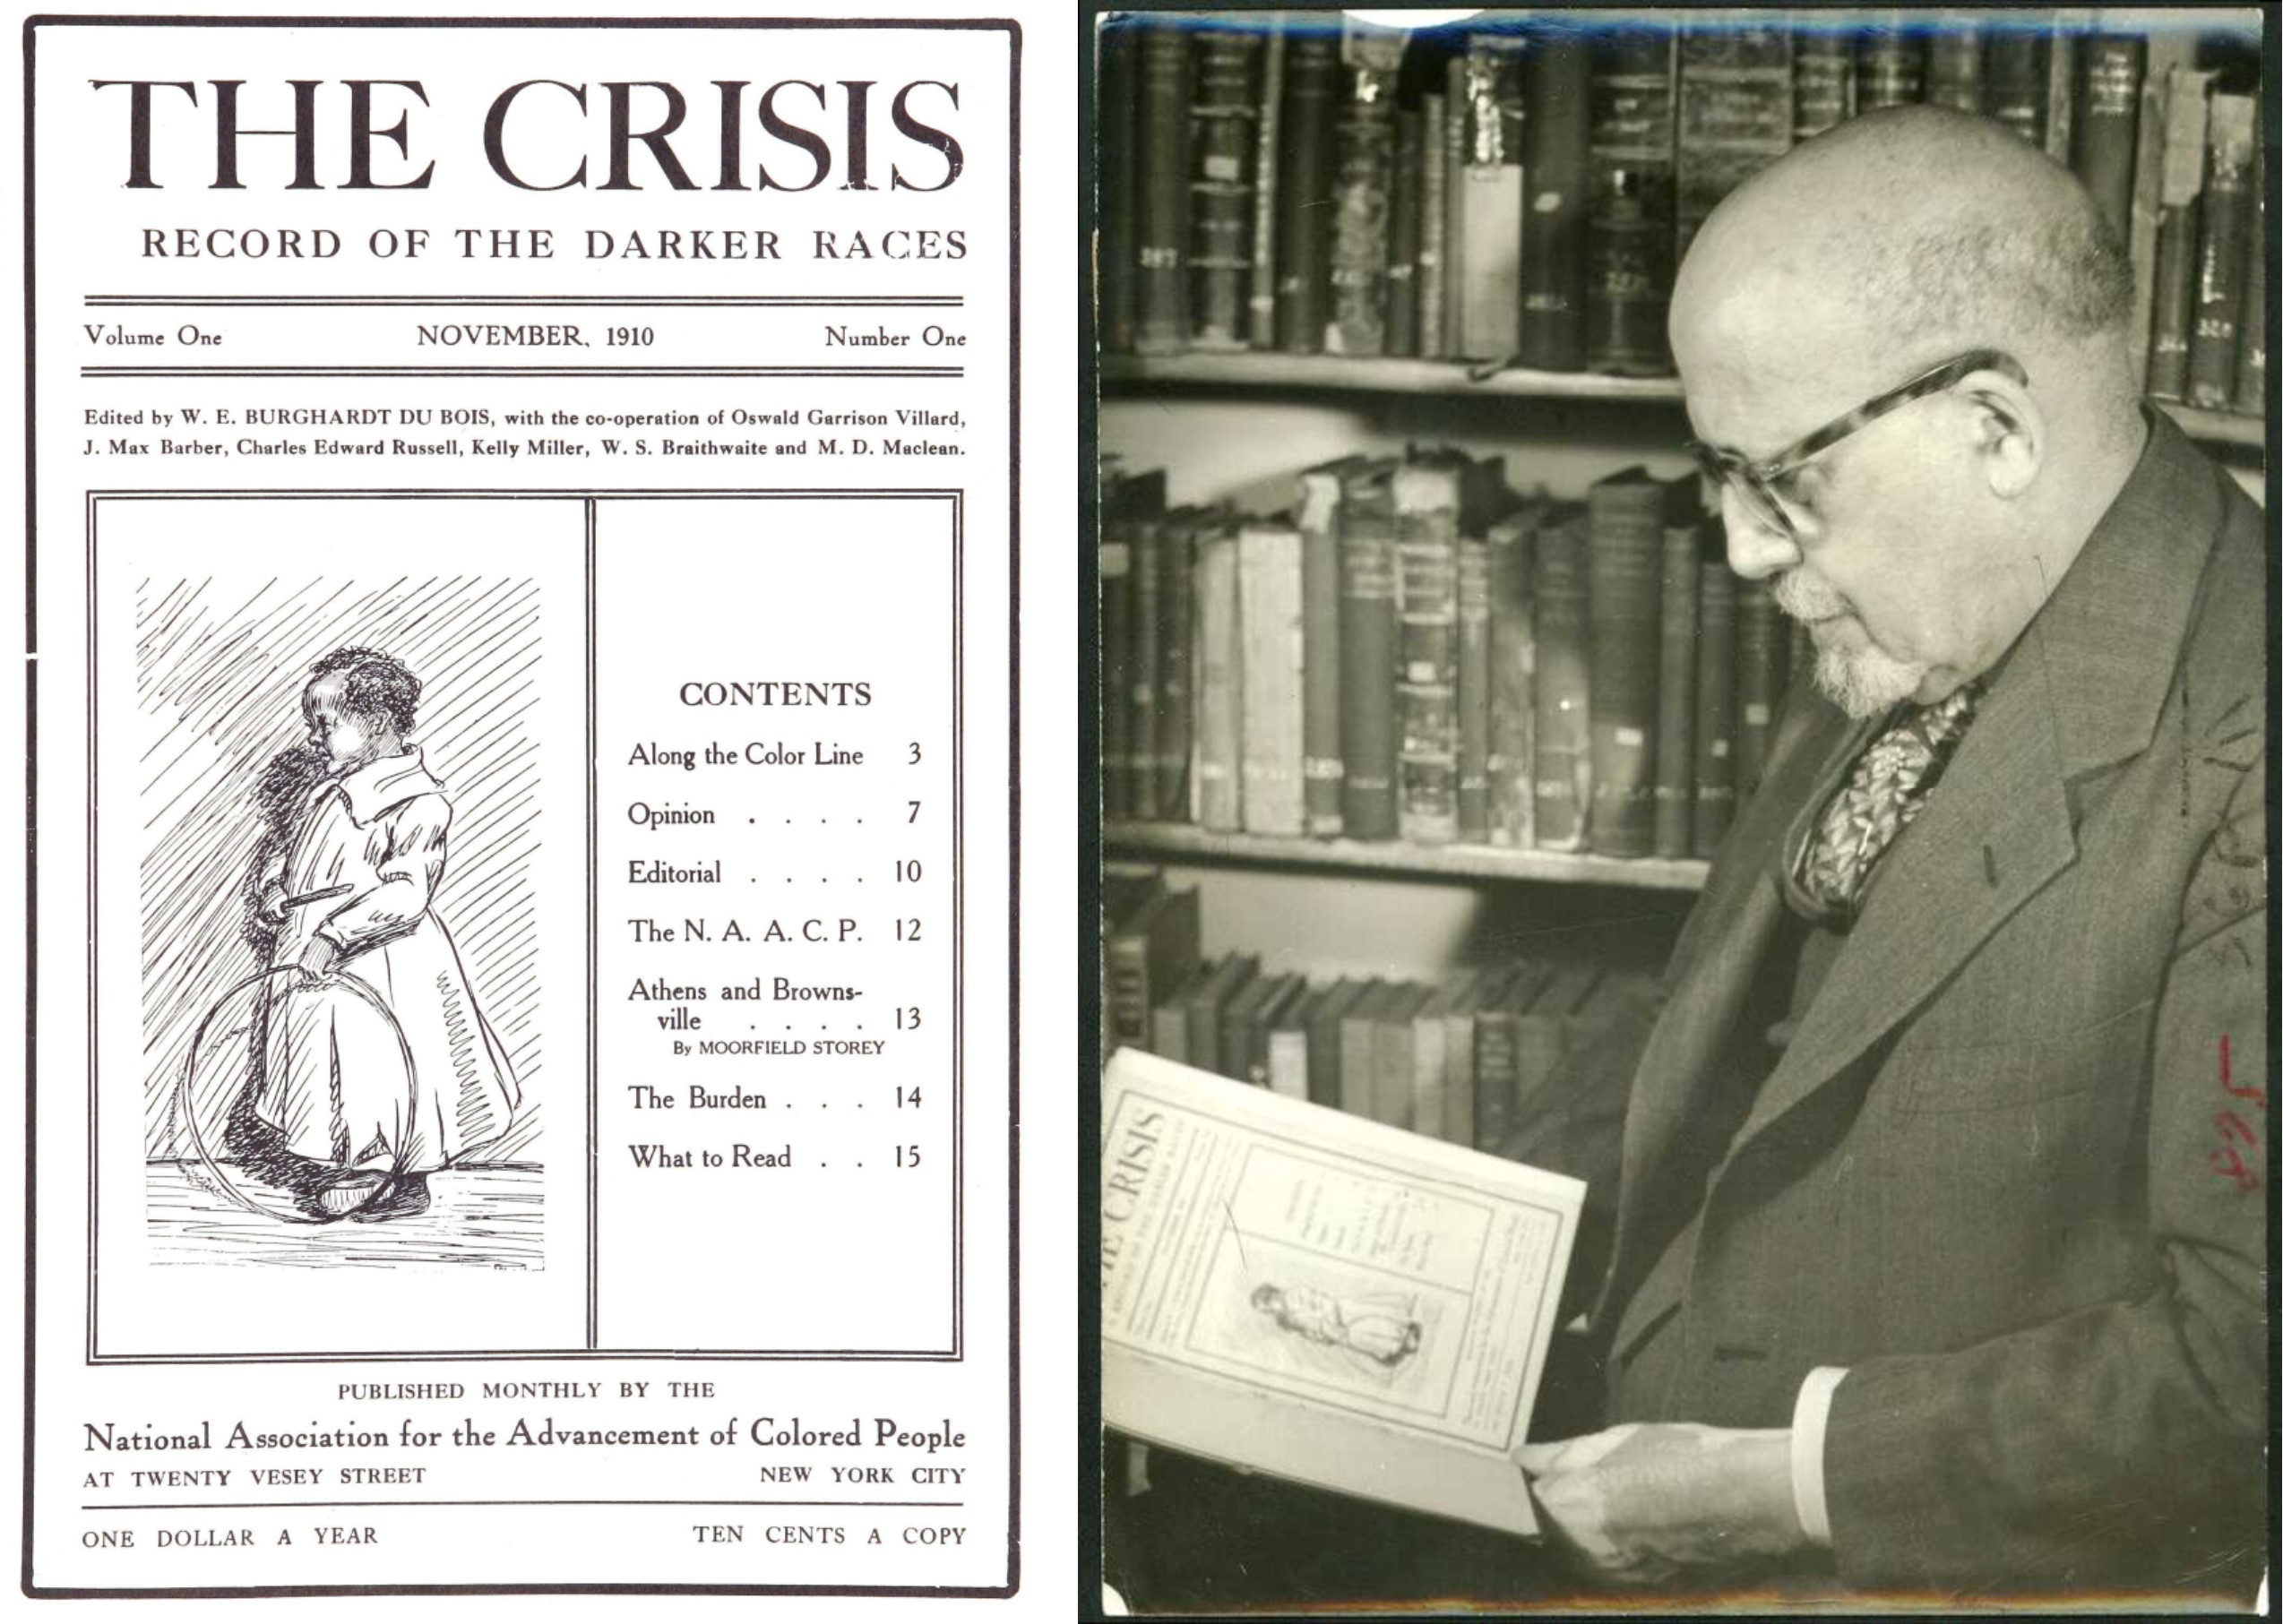 On the left, the cover of the first issue of The Crisis. On the right, Du Bois in his office holding a copy of the first issue of the Crisis.